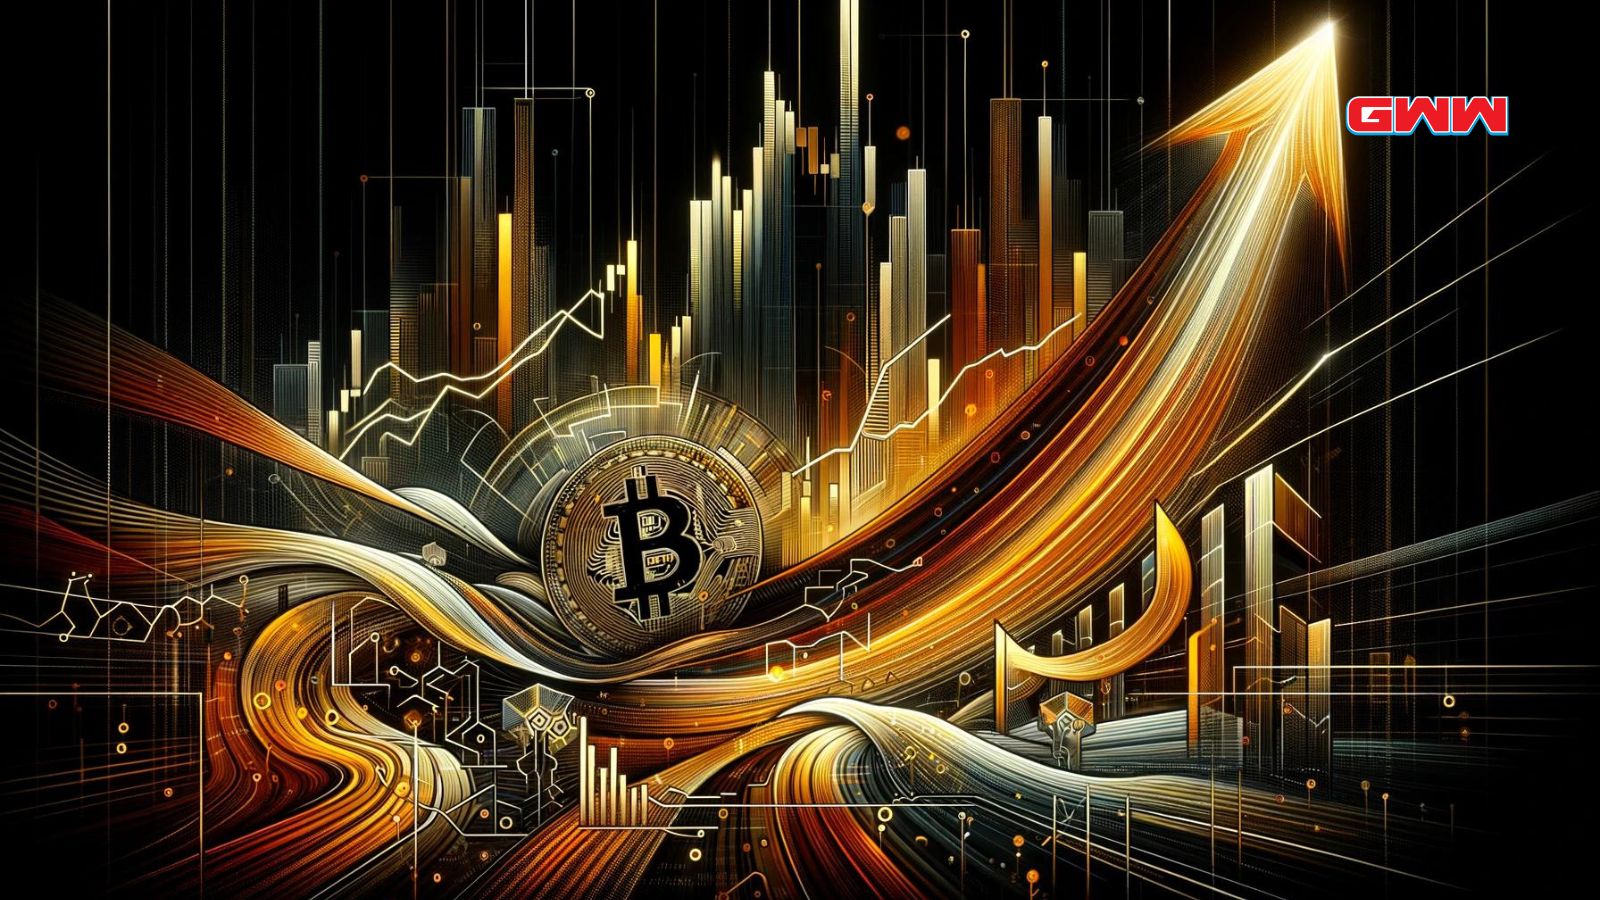 Abstract Bitcoin market dynamics in gold and black